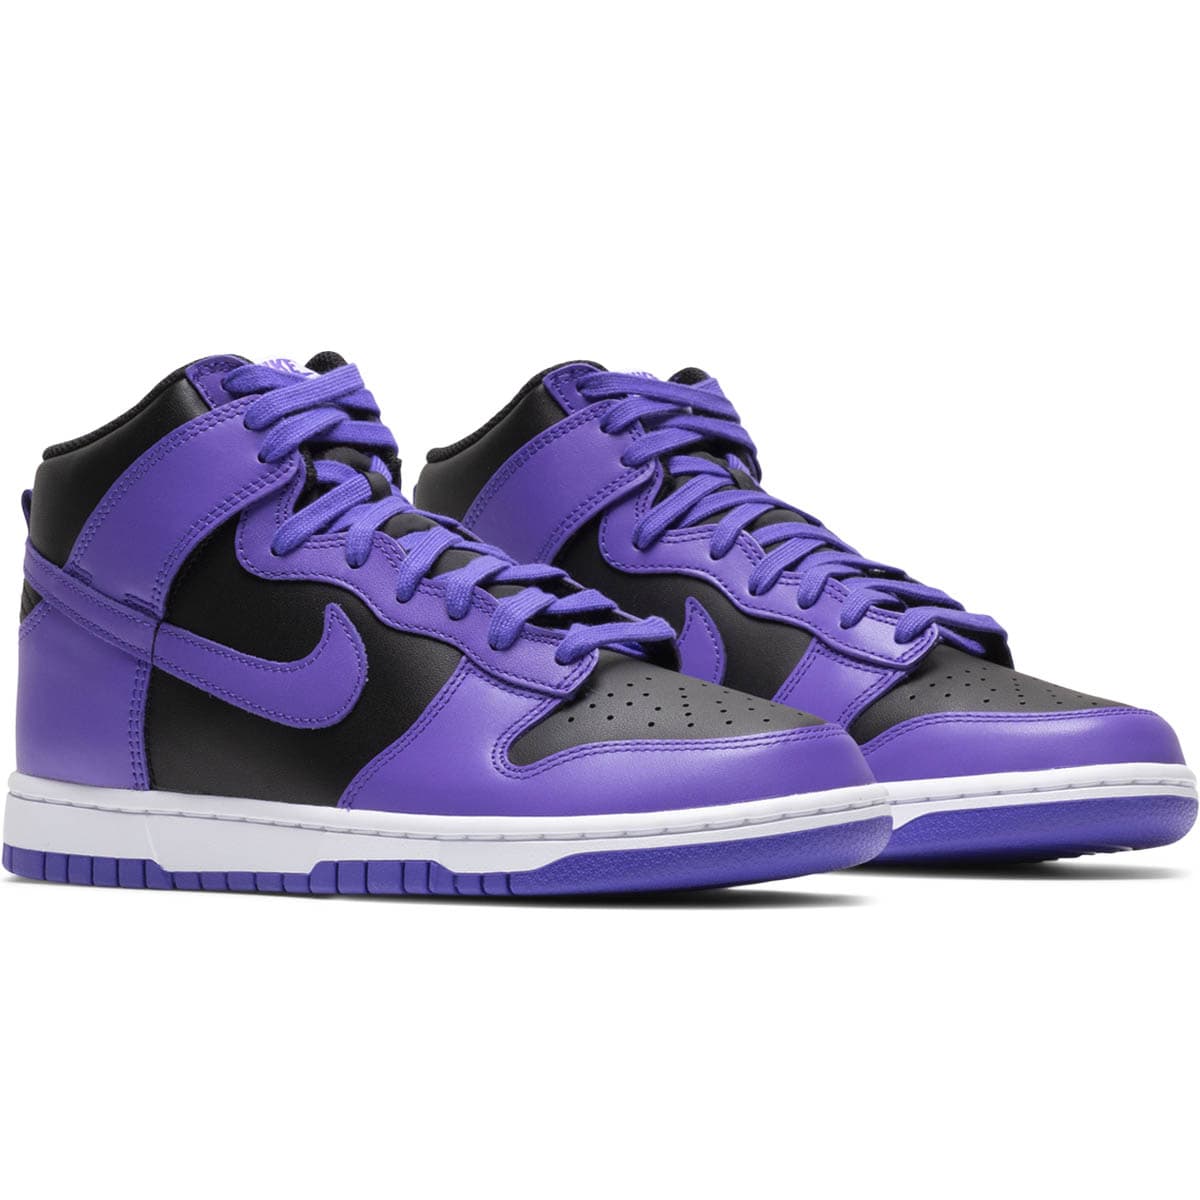 Nike Dunk High Retro BTTYS sneakers in purple and black